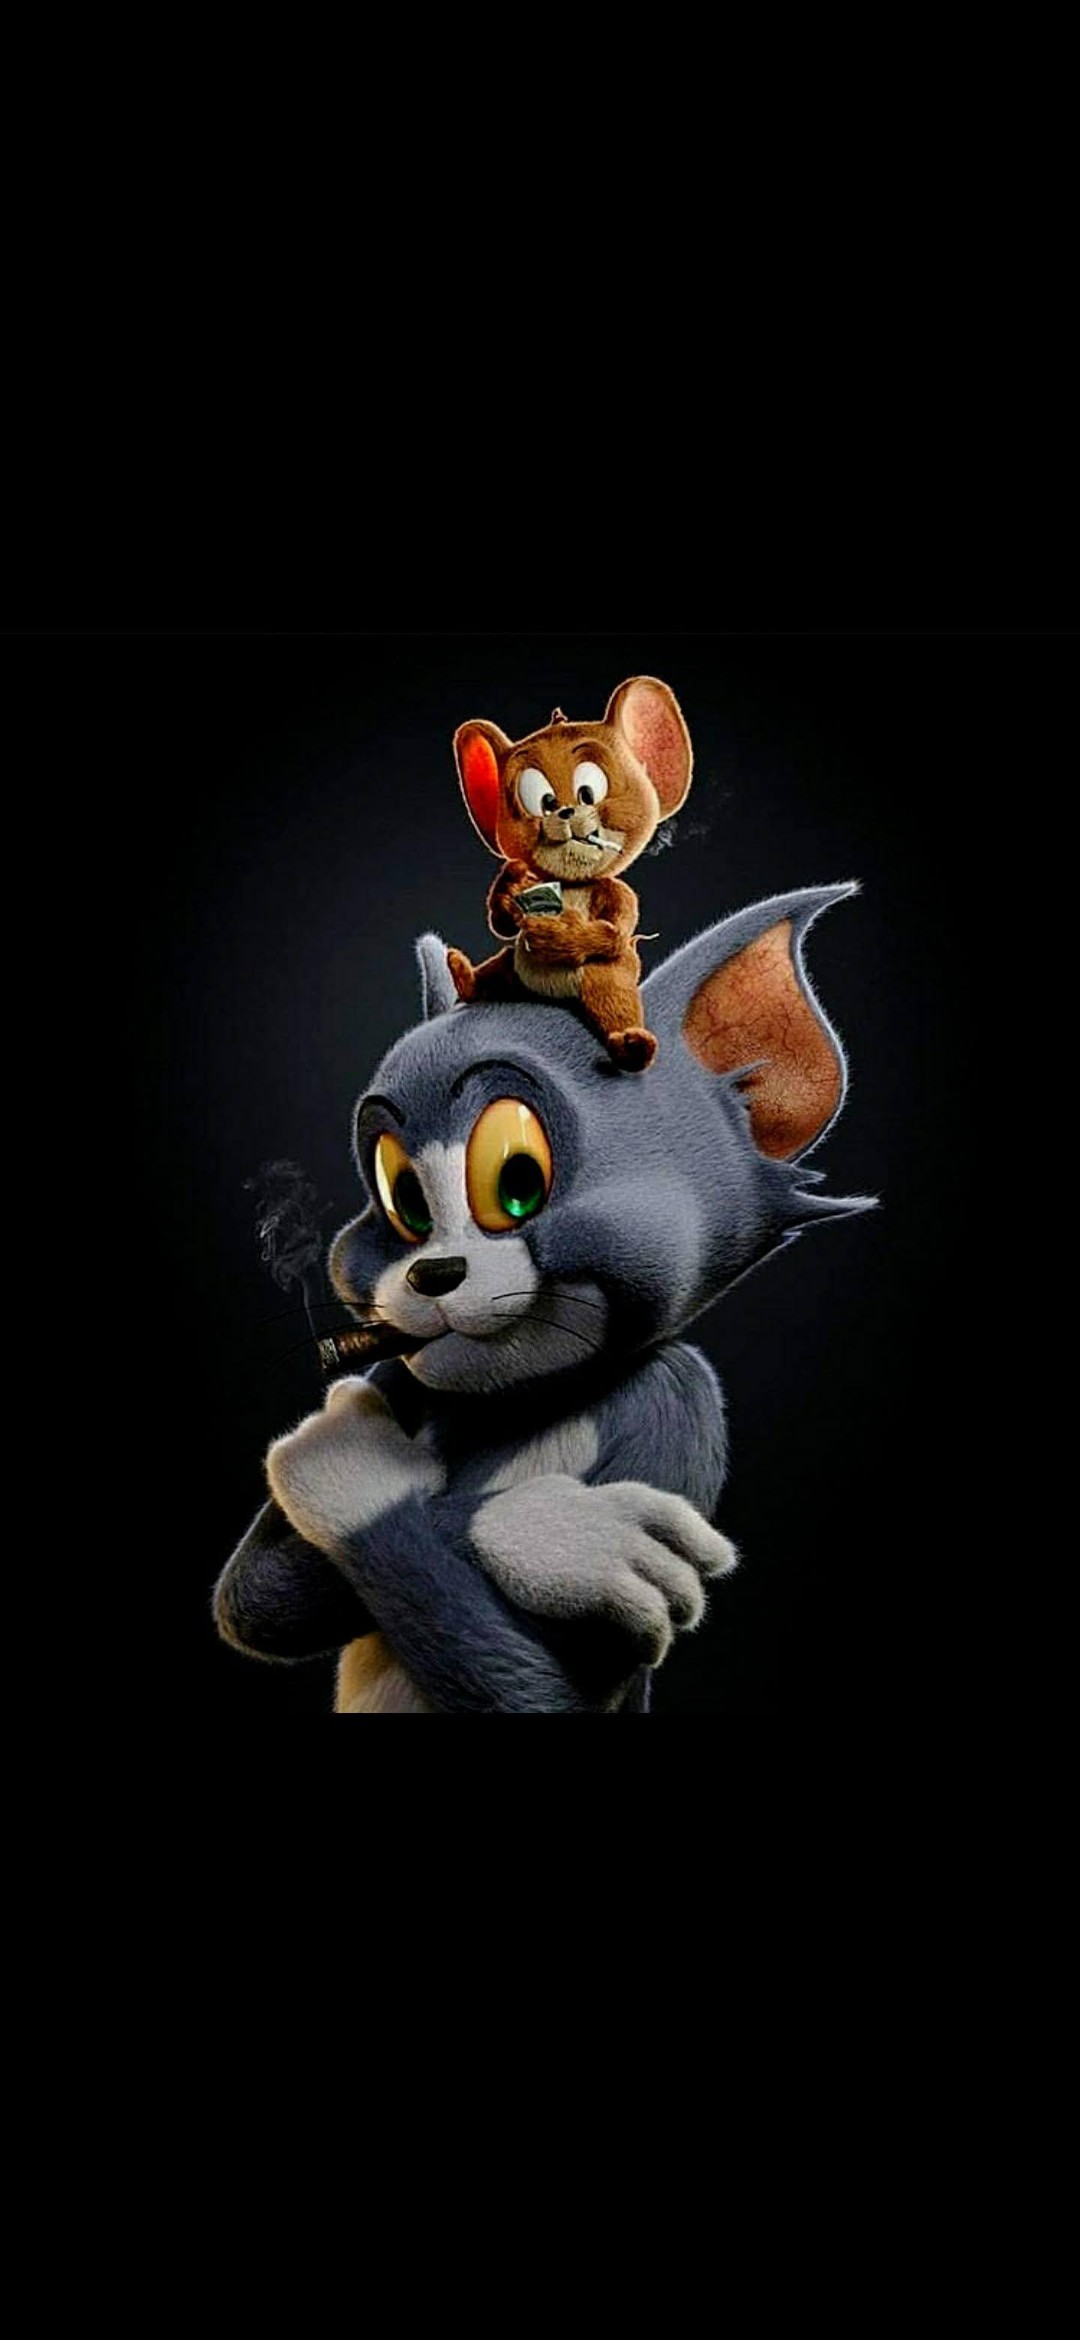 1080x2340 Tom and Jerry Wallpaper Download для Android Amoled Screen ⋆ Traxzee